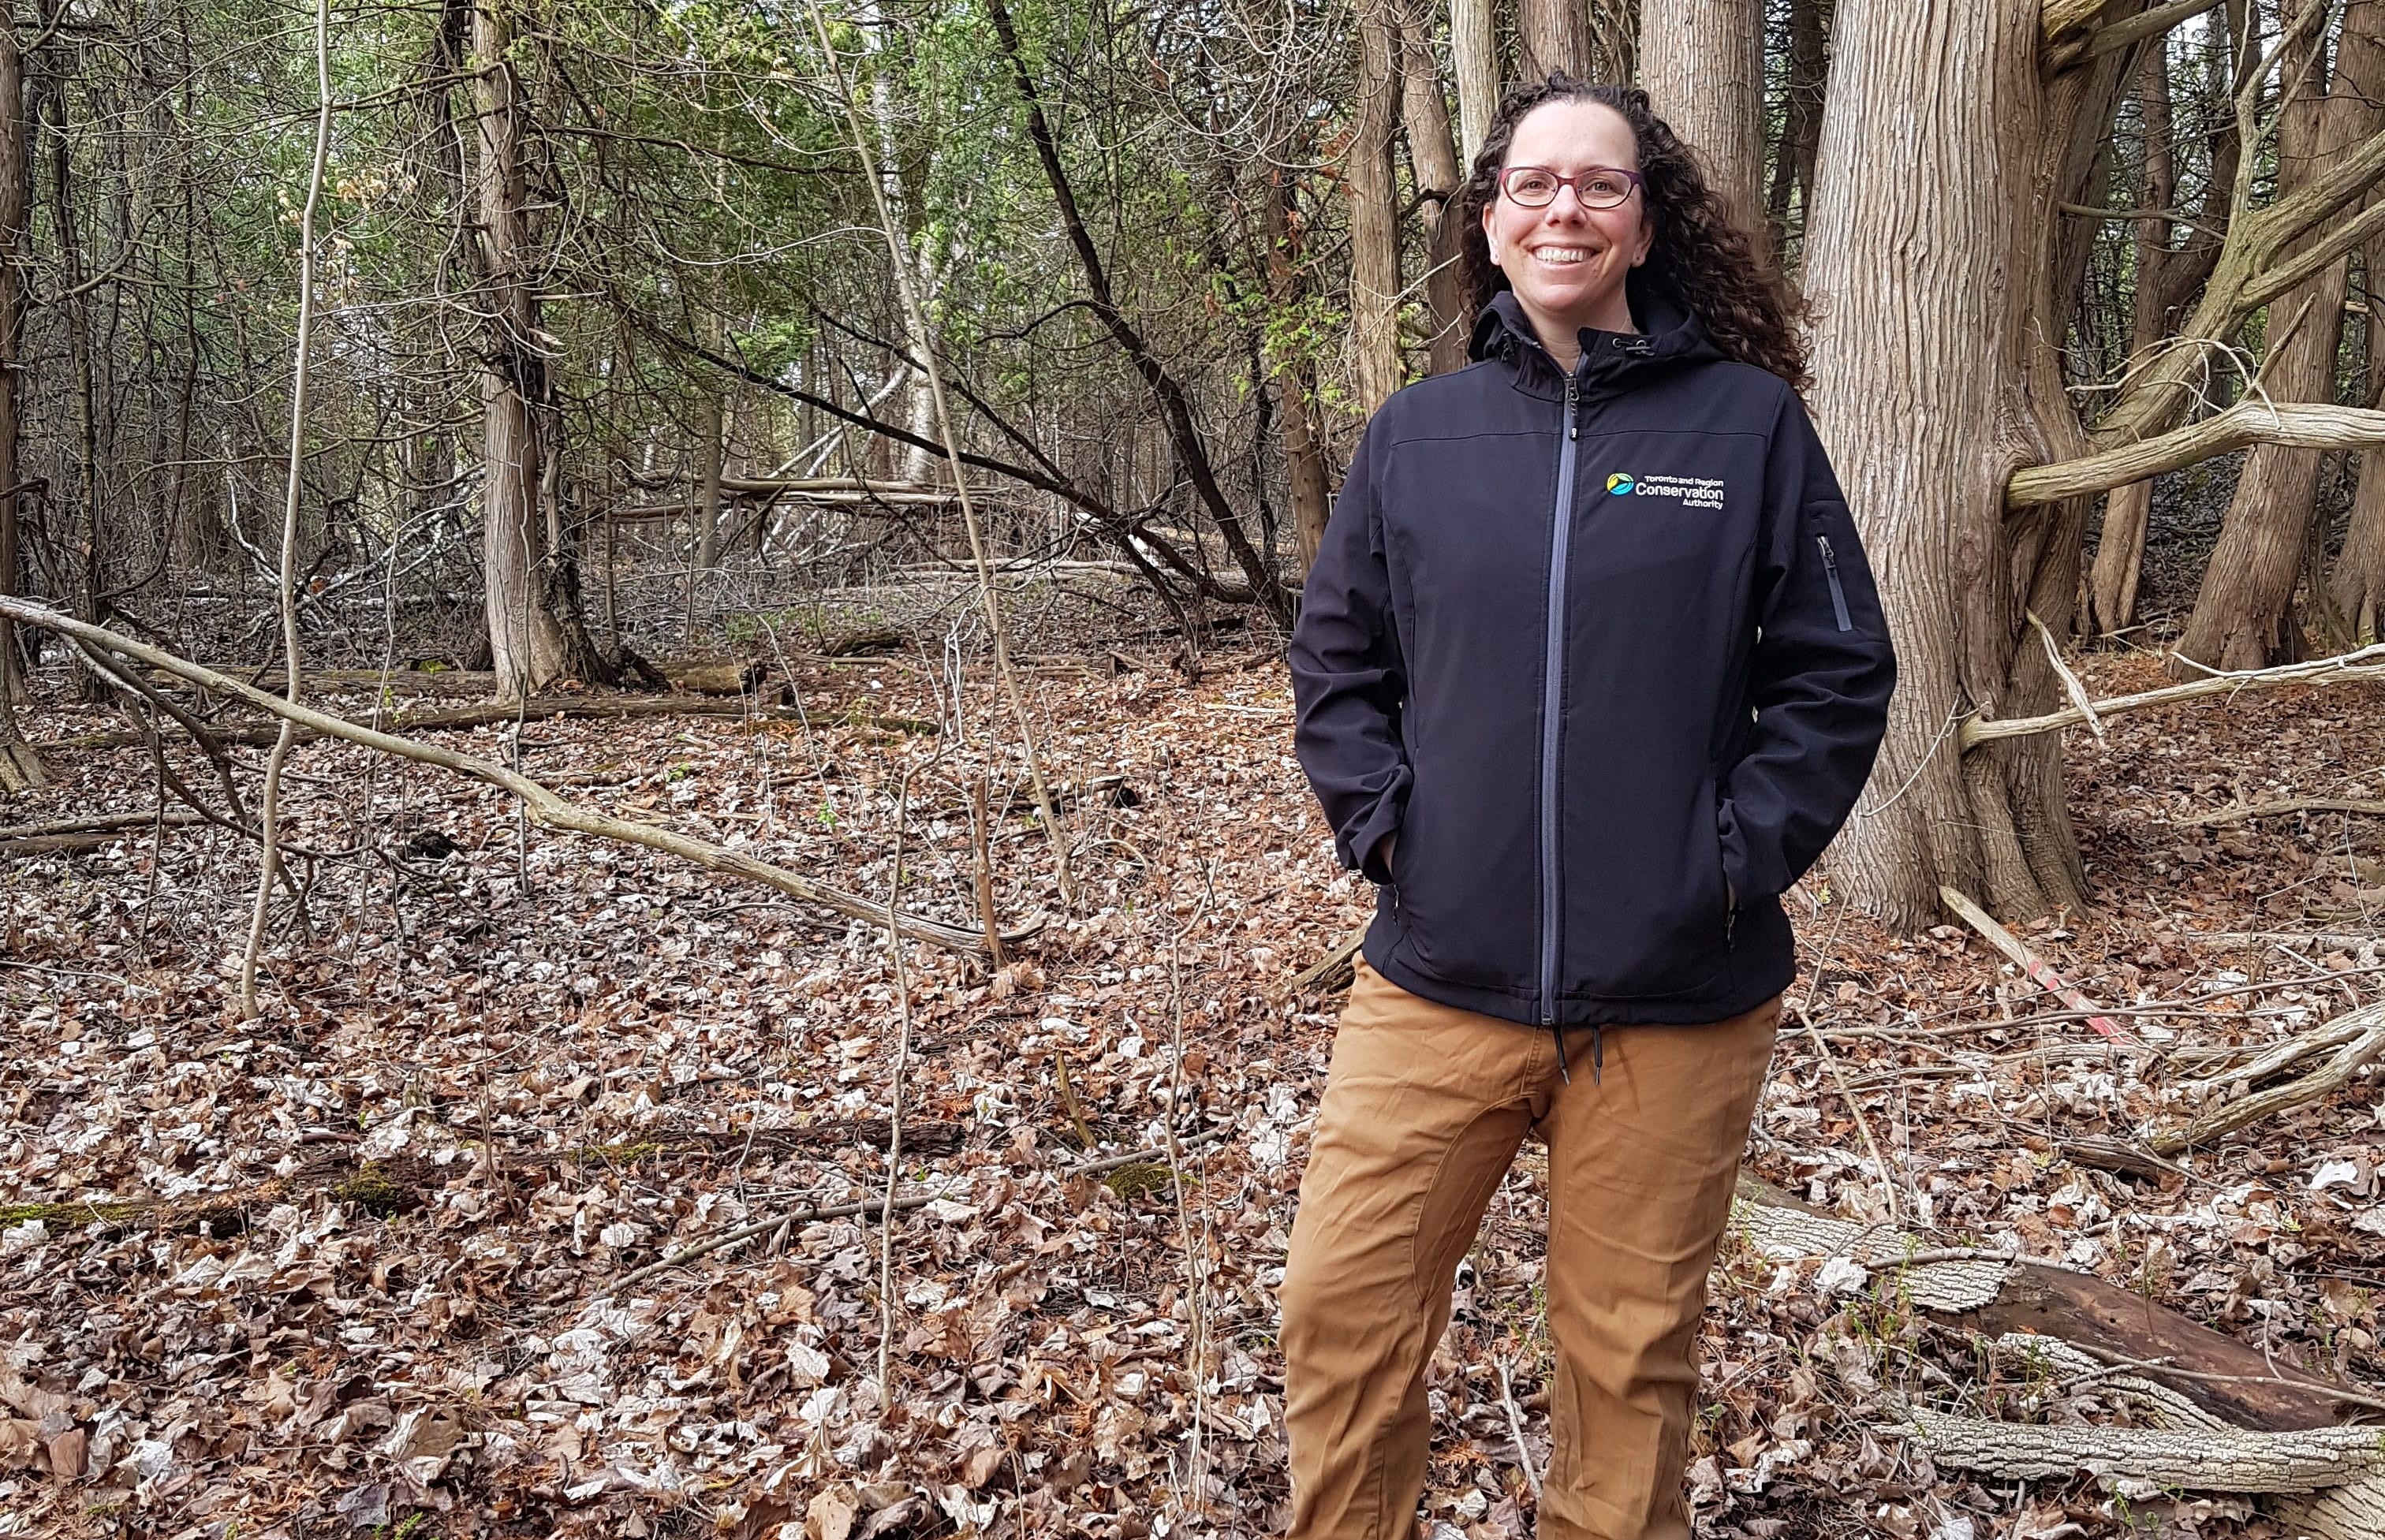 TRCA employee Kelly Jamieson in a forest